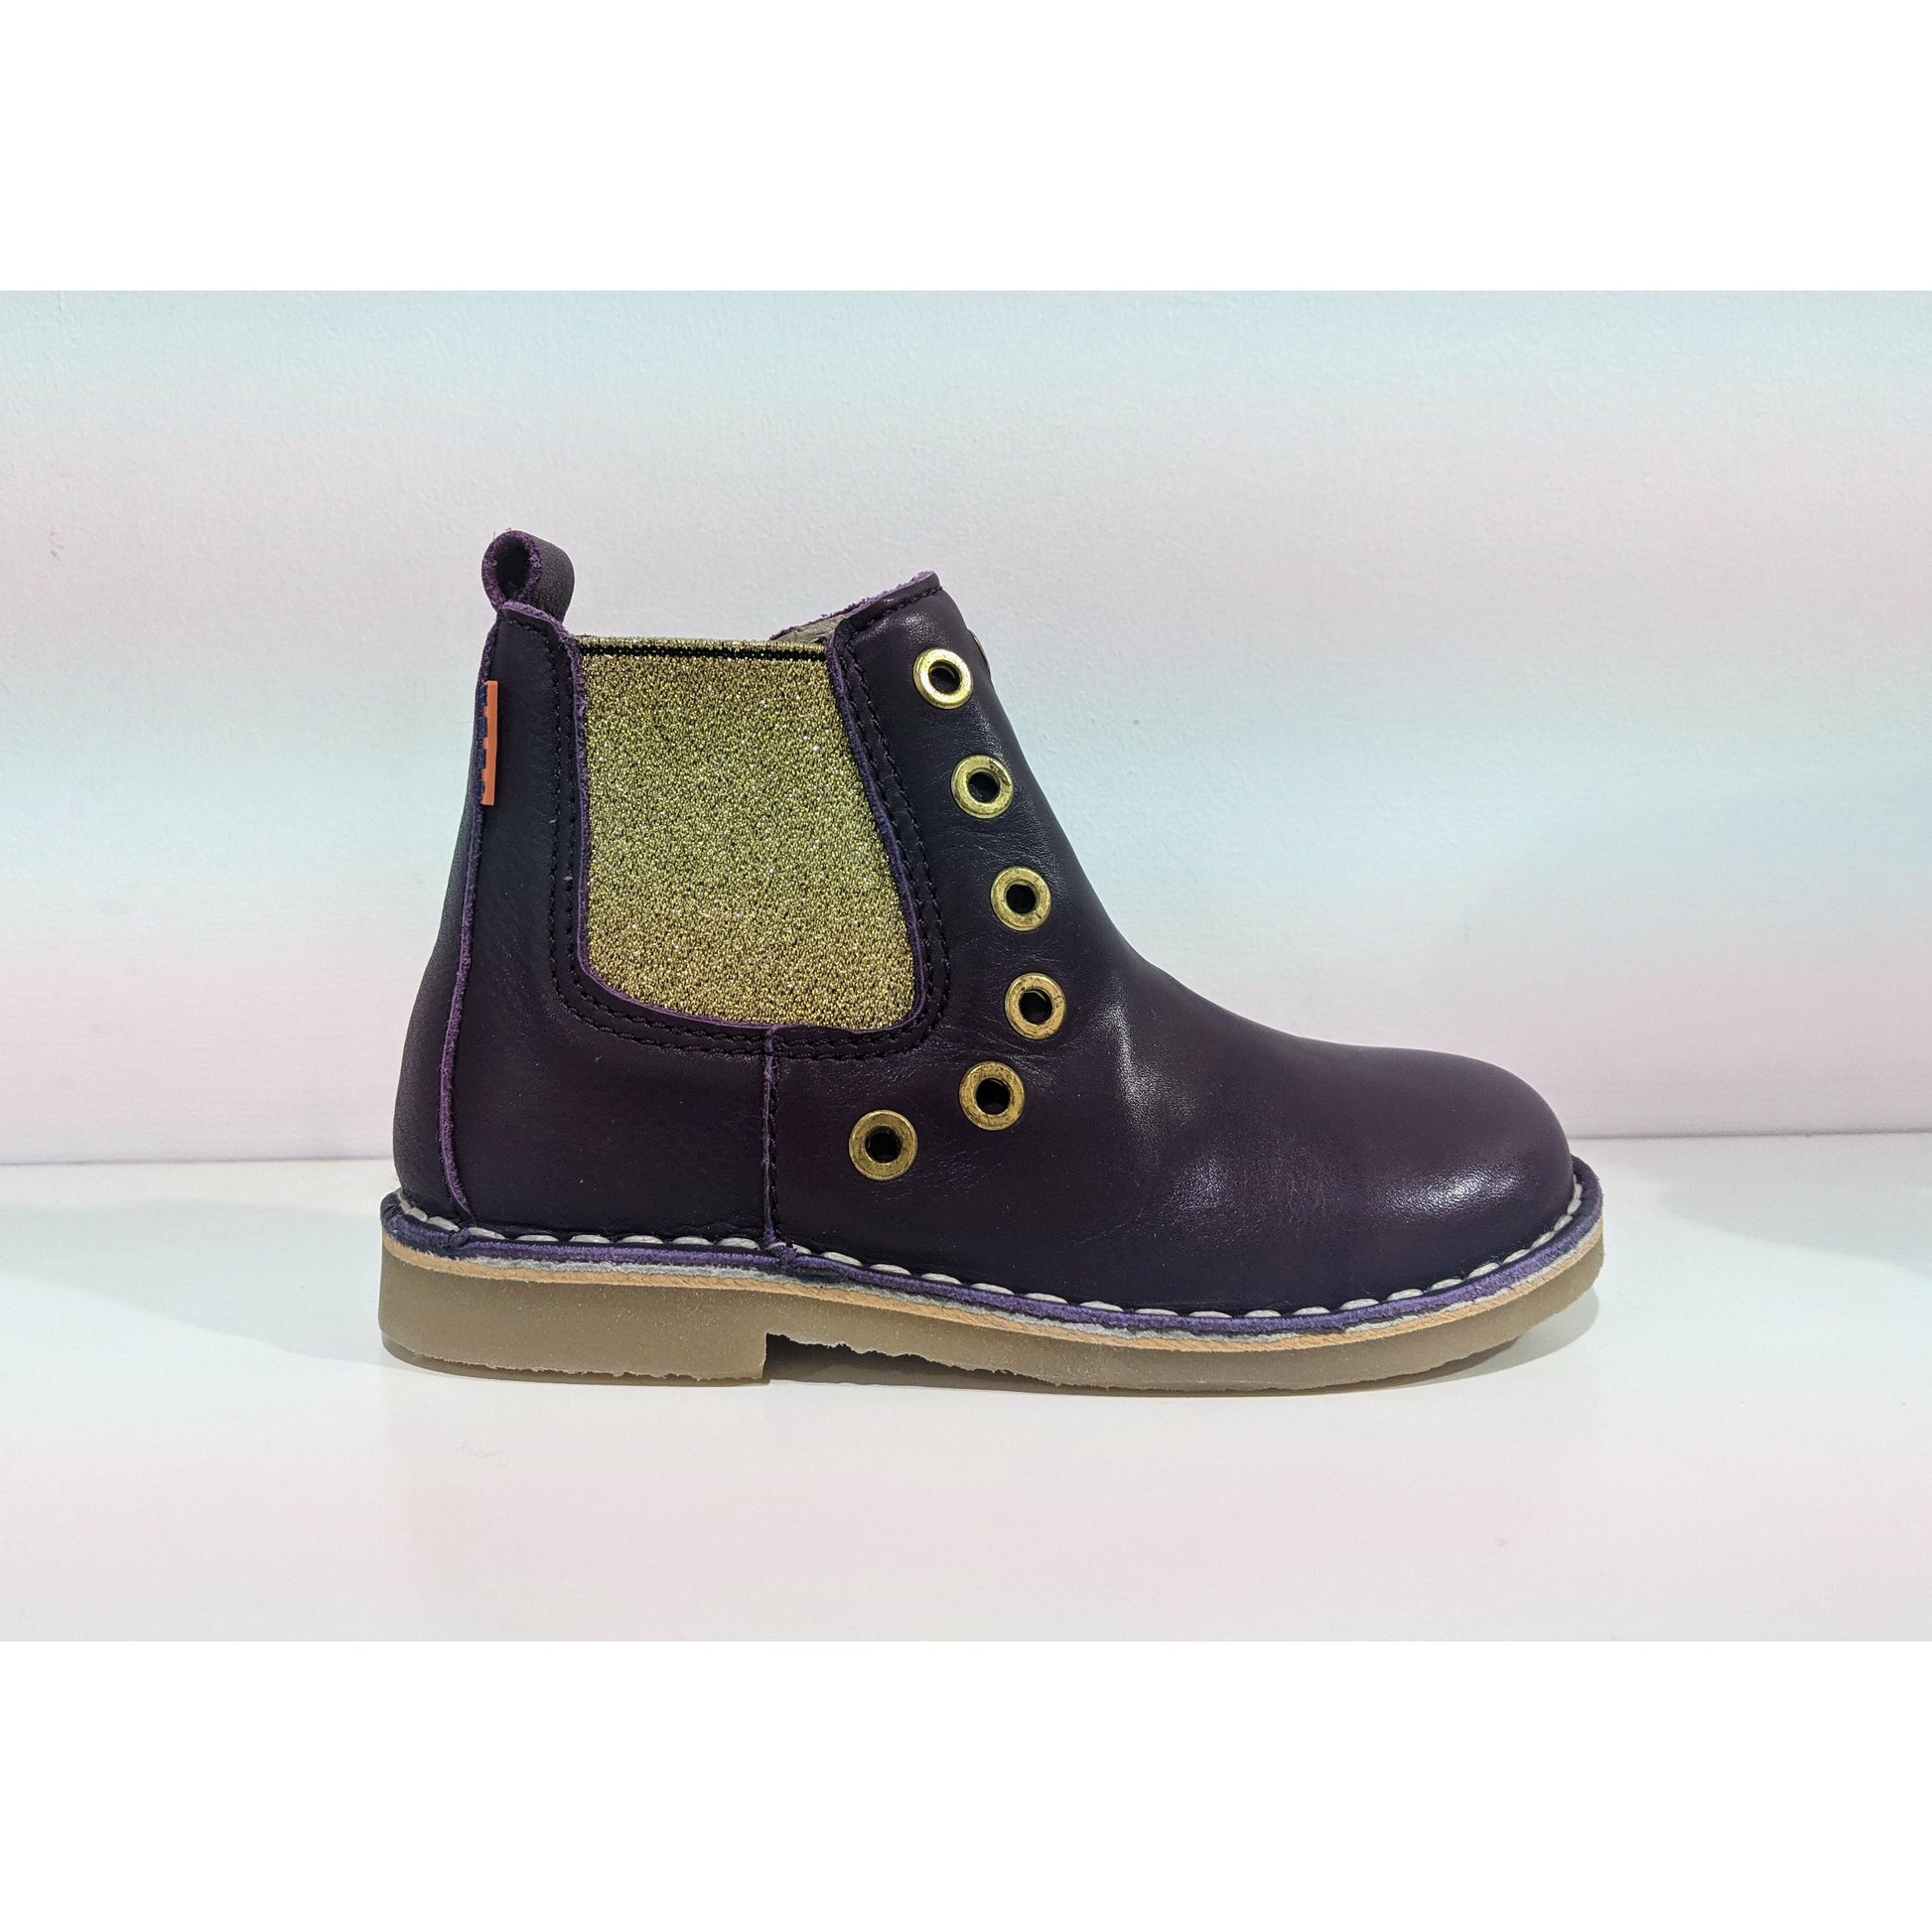 A girls chelsea boot by Petasil, style Alison, in purple and gold with zip fastening. Right side view.